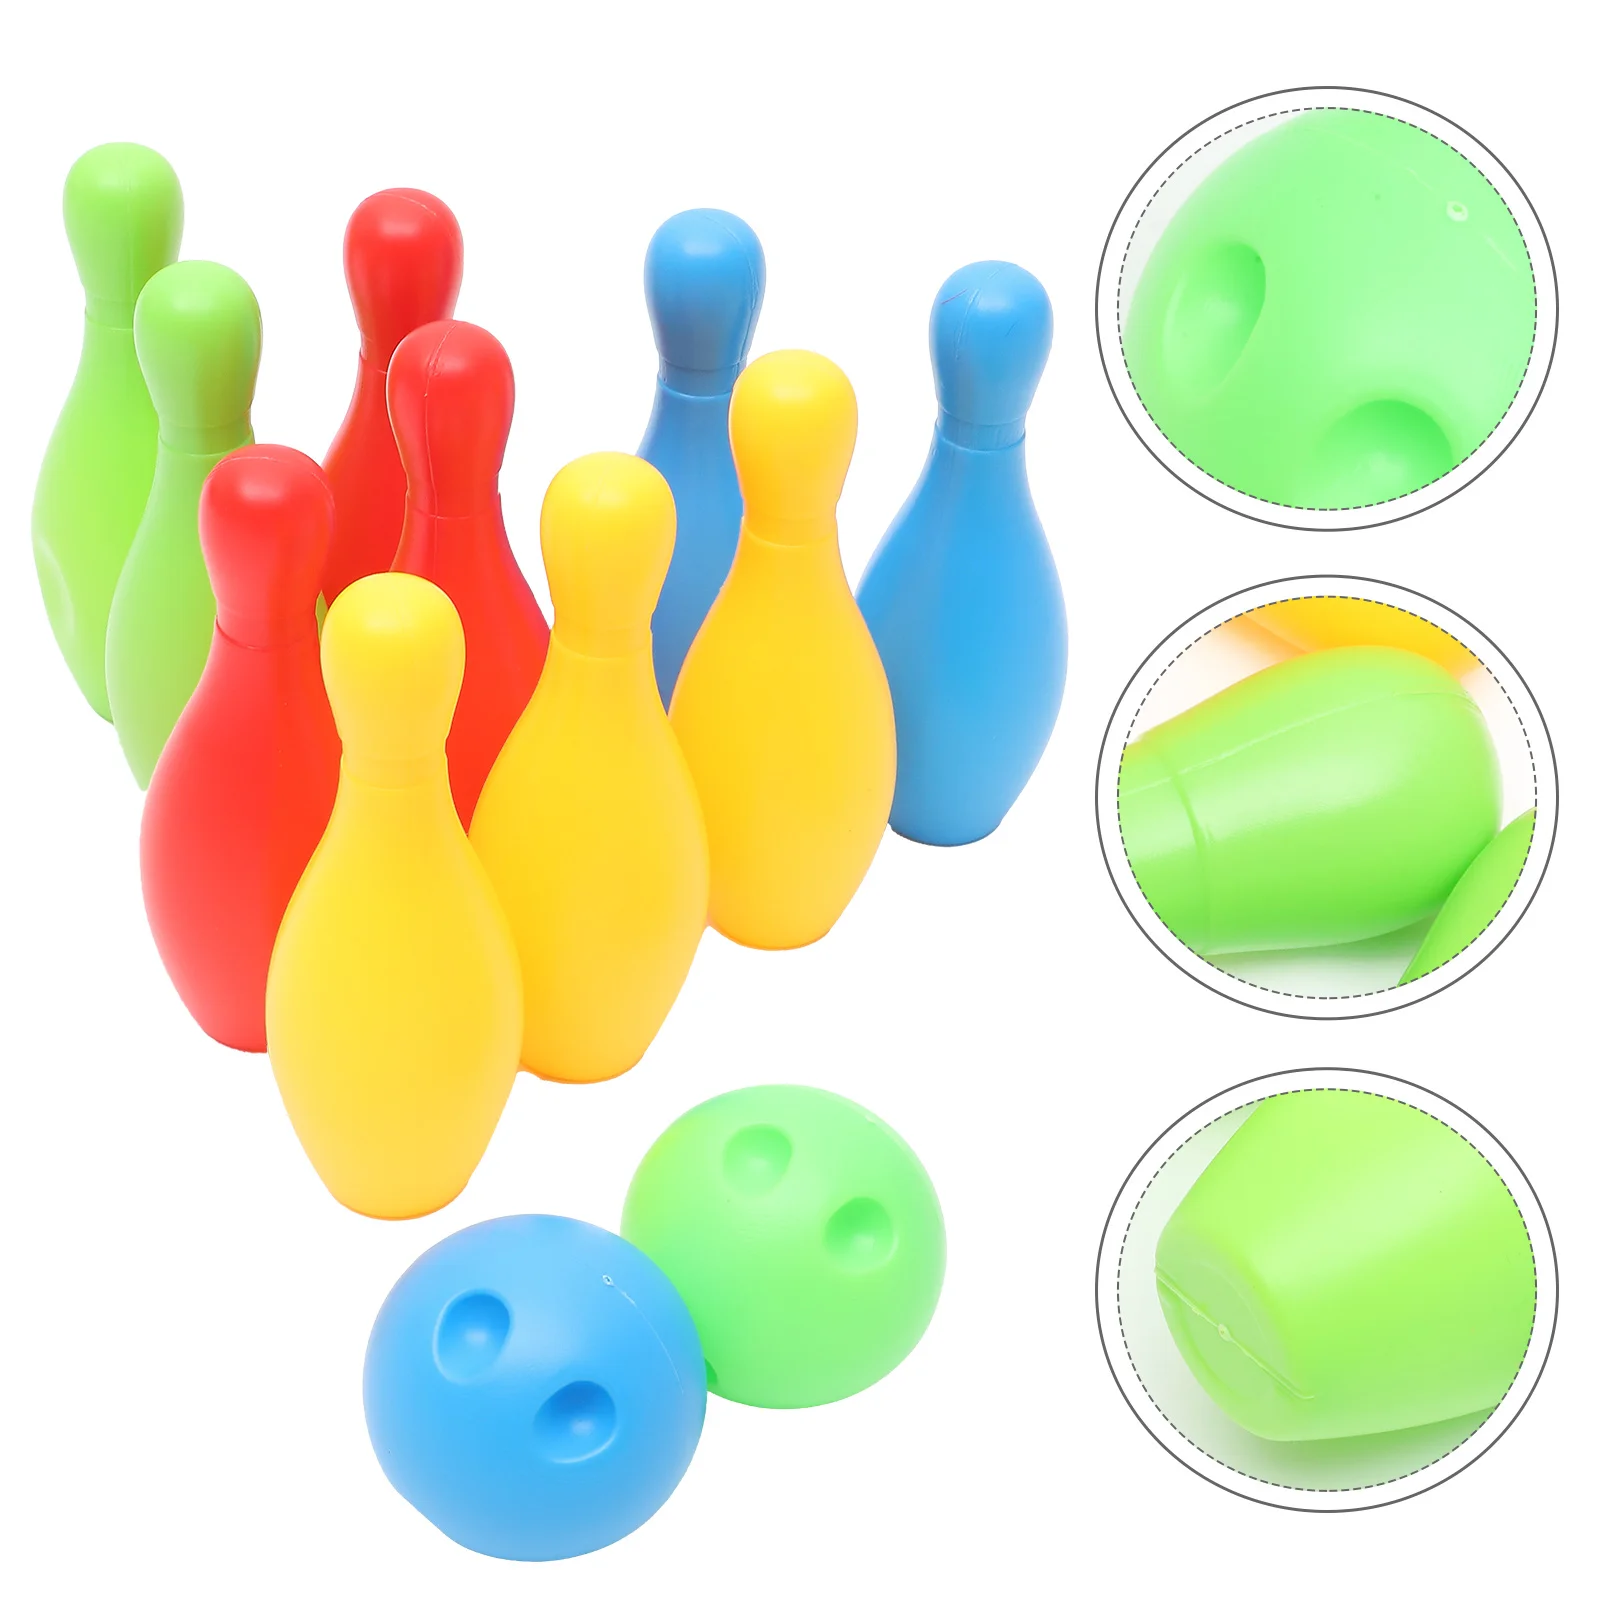 

14CM Height Bowling Play Sets Funny Indoor Sports Bowling Games Educational Toy for Home Kindergarten (10 Pcs Bottle and 2 Pcs